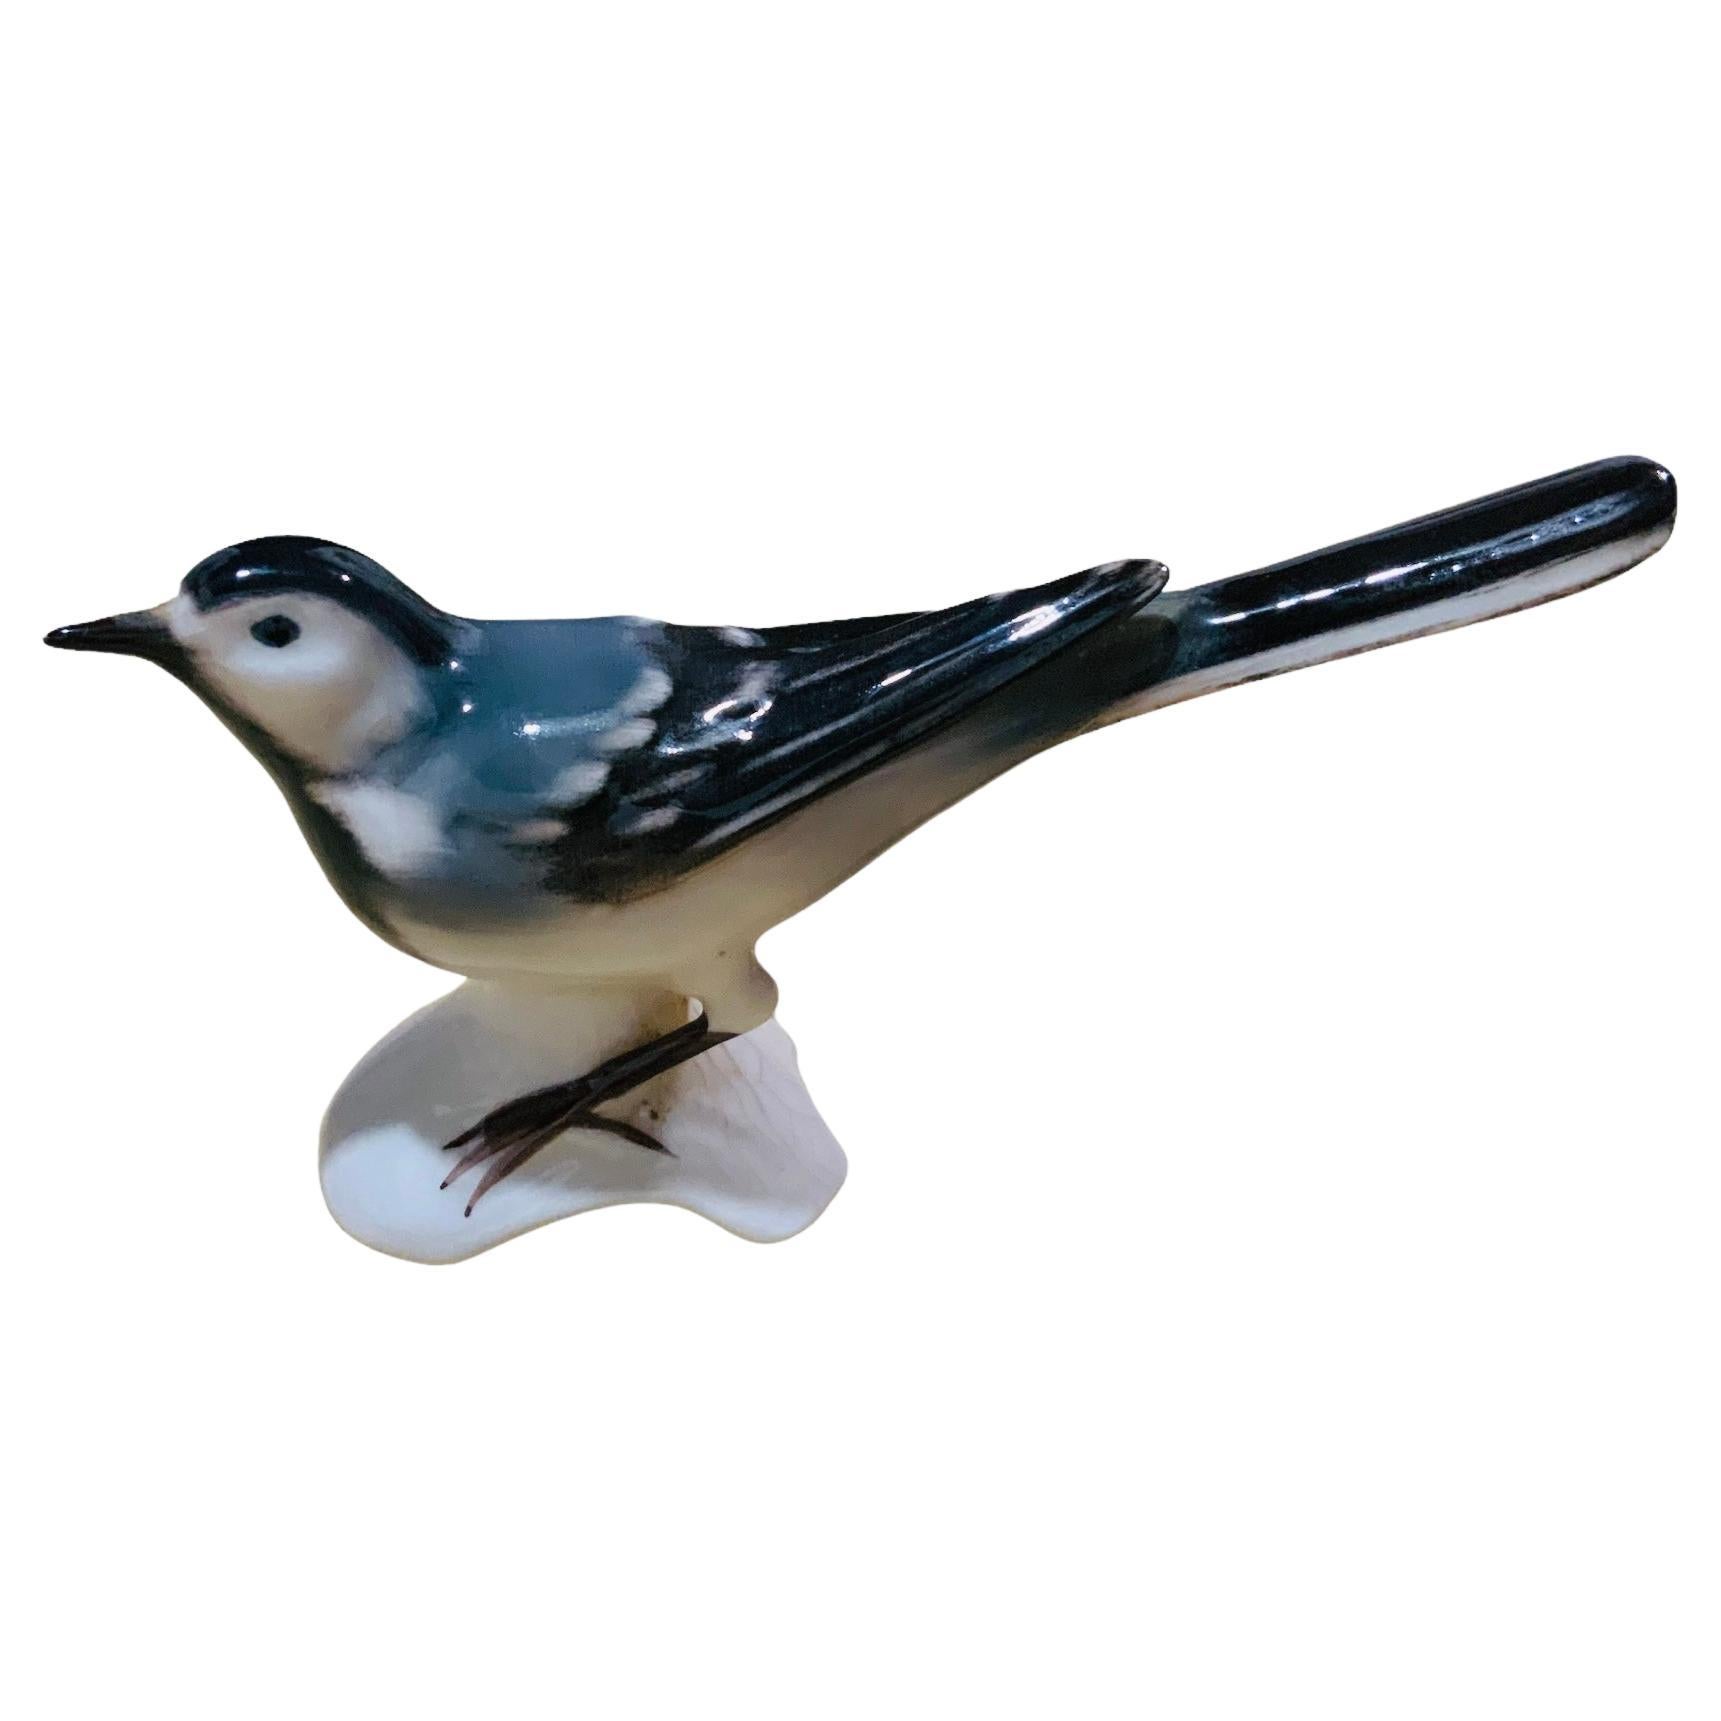 Goebel Porcelain Hand Painted Bird Figurine of a Wagtail